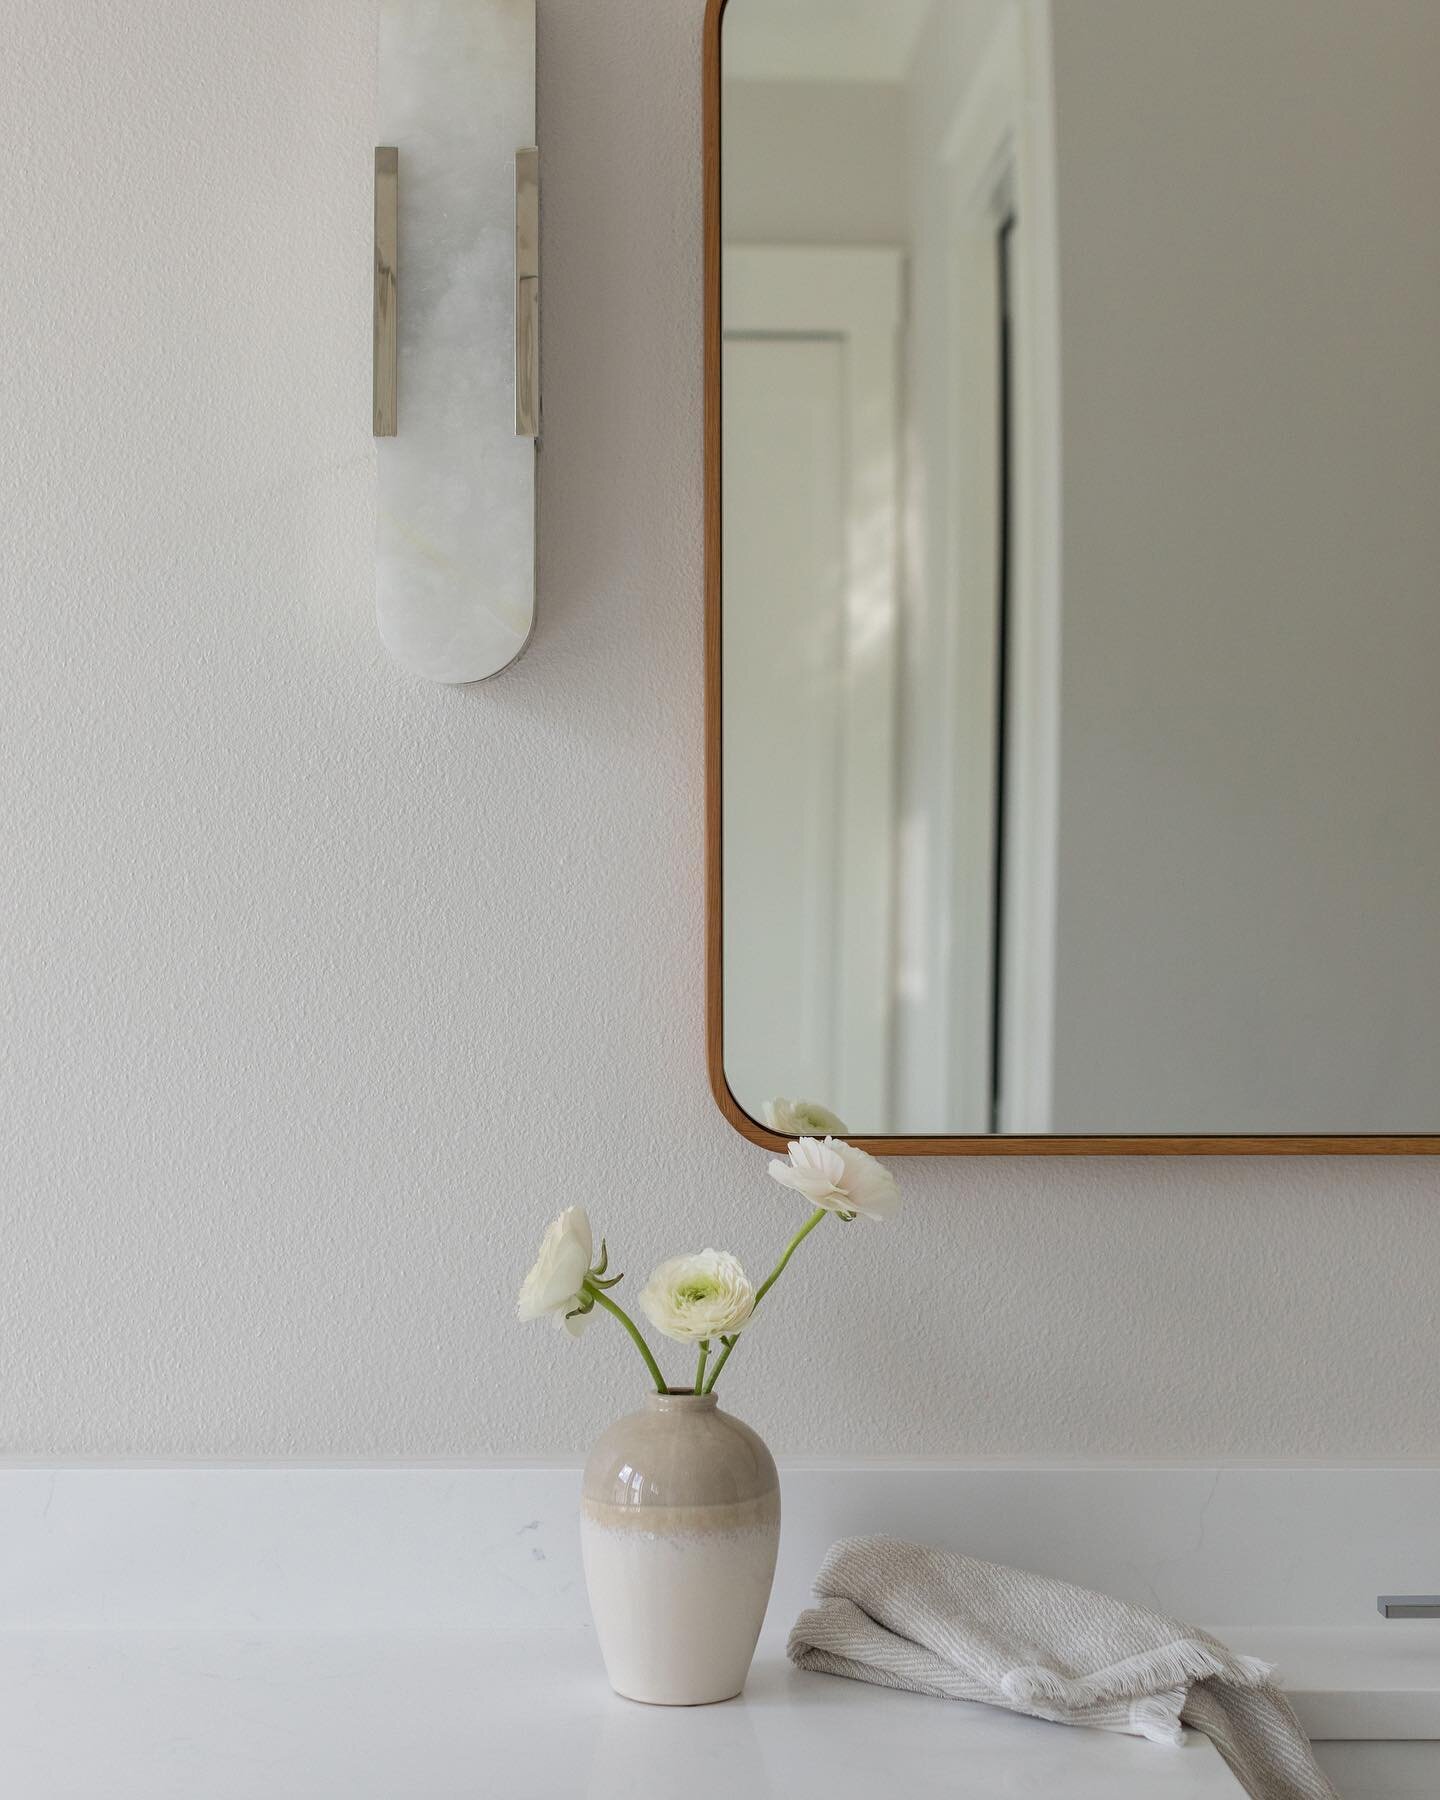 Simple elegant details✨That alabaster sconce is really stealing the show in my opinion. #CorioDesignHouse 

Photography by @bgodbee.photographer 
Architecture by Brodeur Home Designs